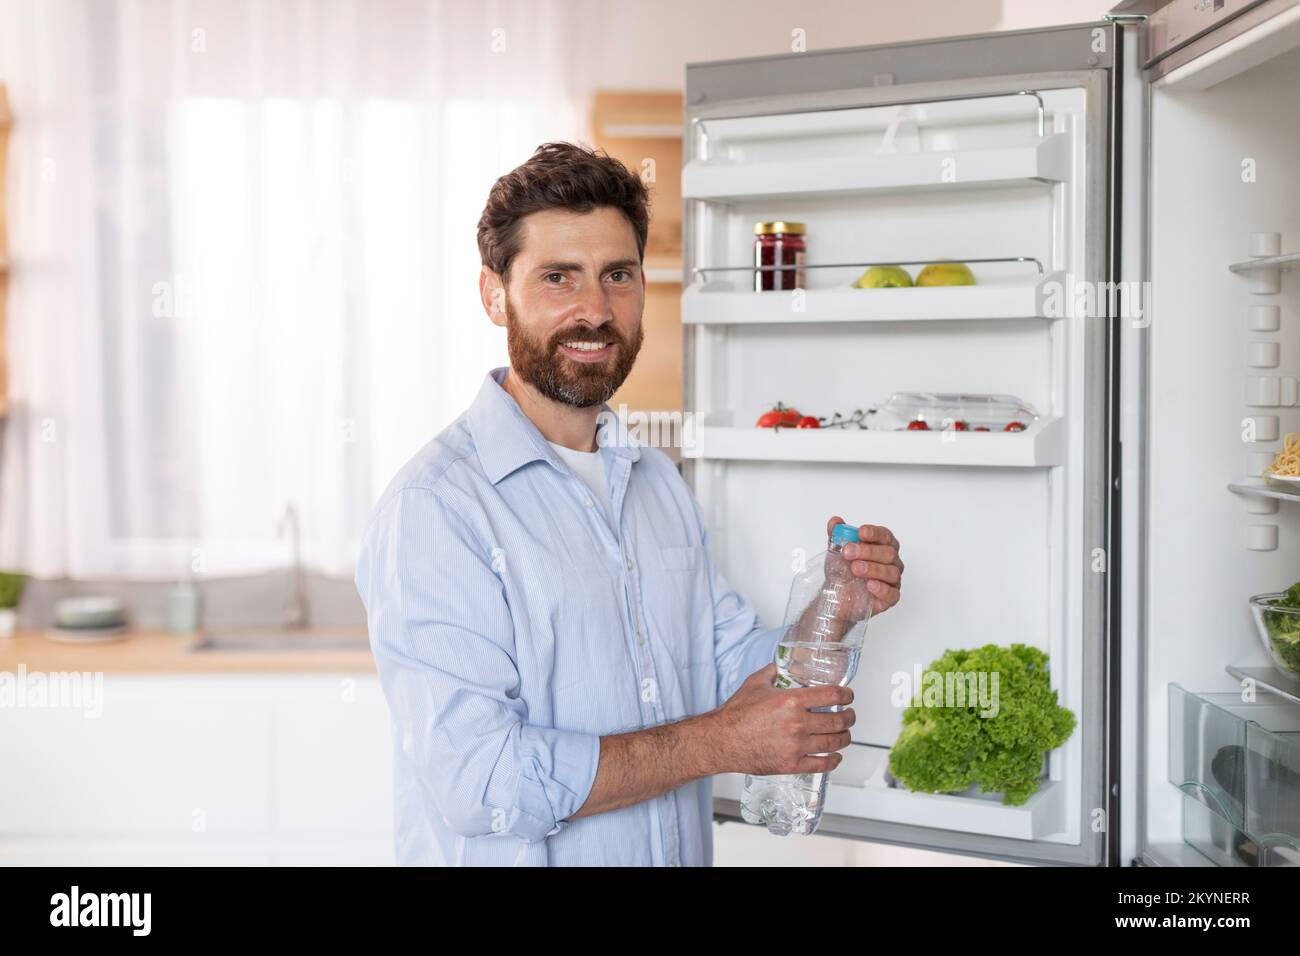 Cheerful mature caucasian male with beard in shirt opens refrigerator door, takes bottle of water in kitchen interior Stock Photo